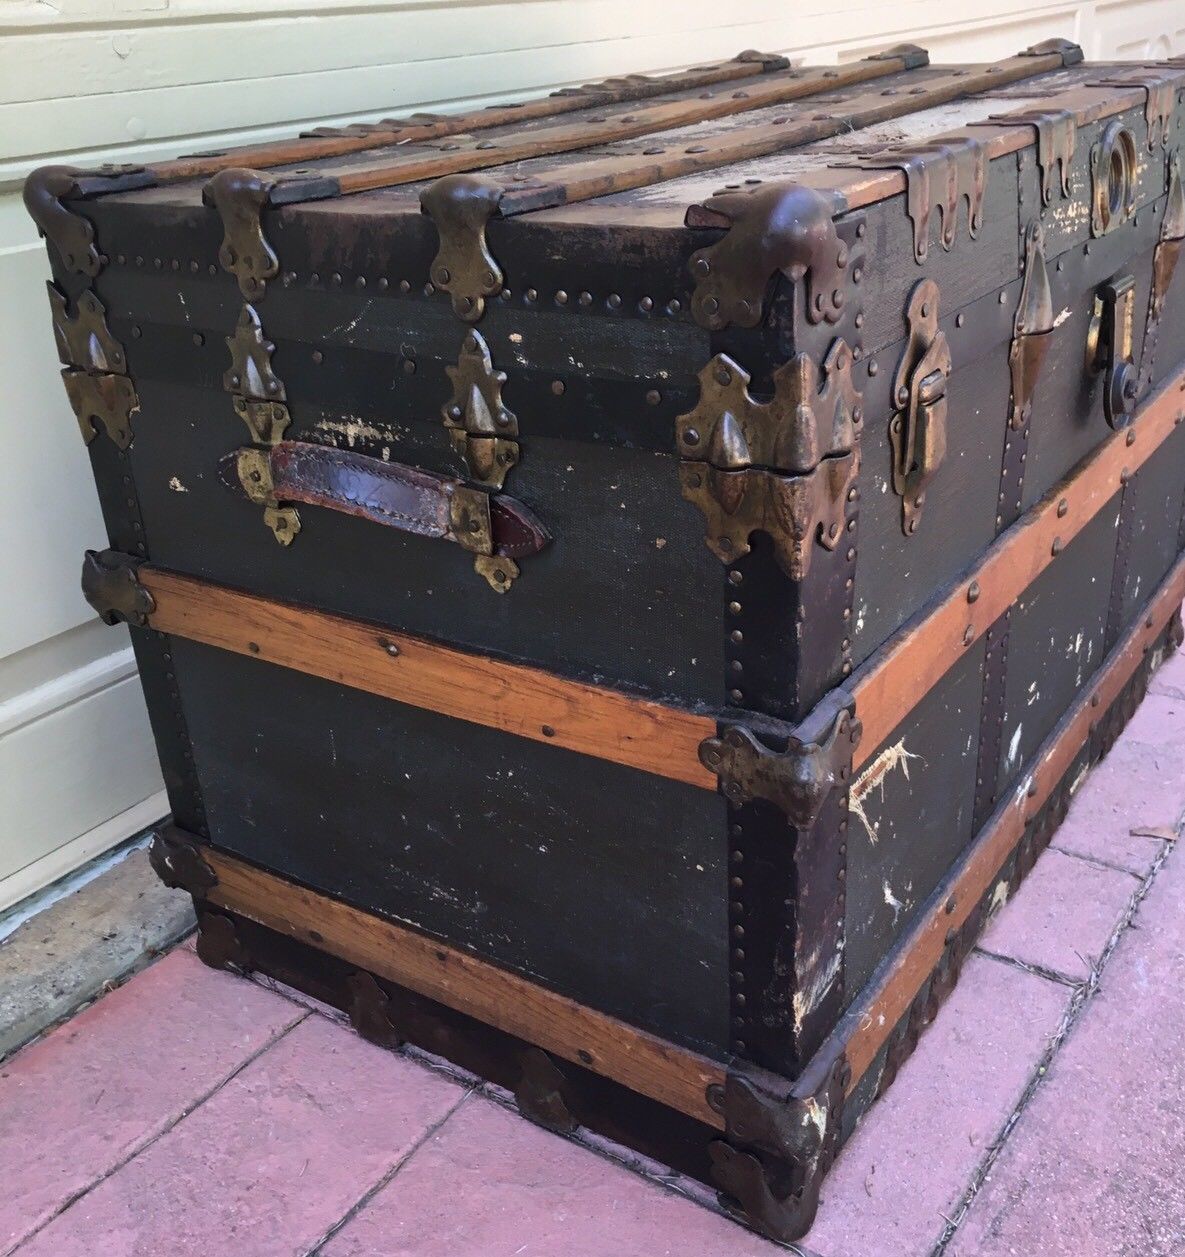 Antique Steamer Trunk 32"x20x23 Large Storage Box Vintage Chest Coffee Table